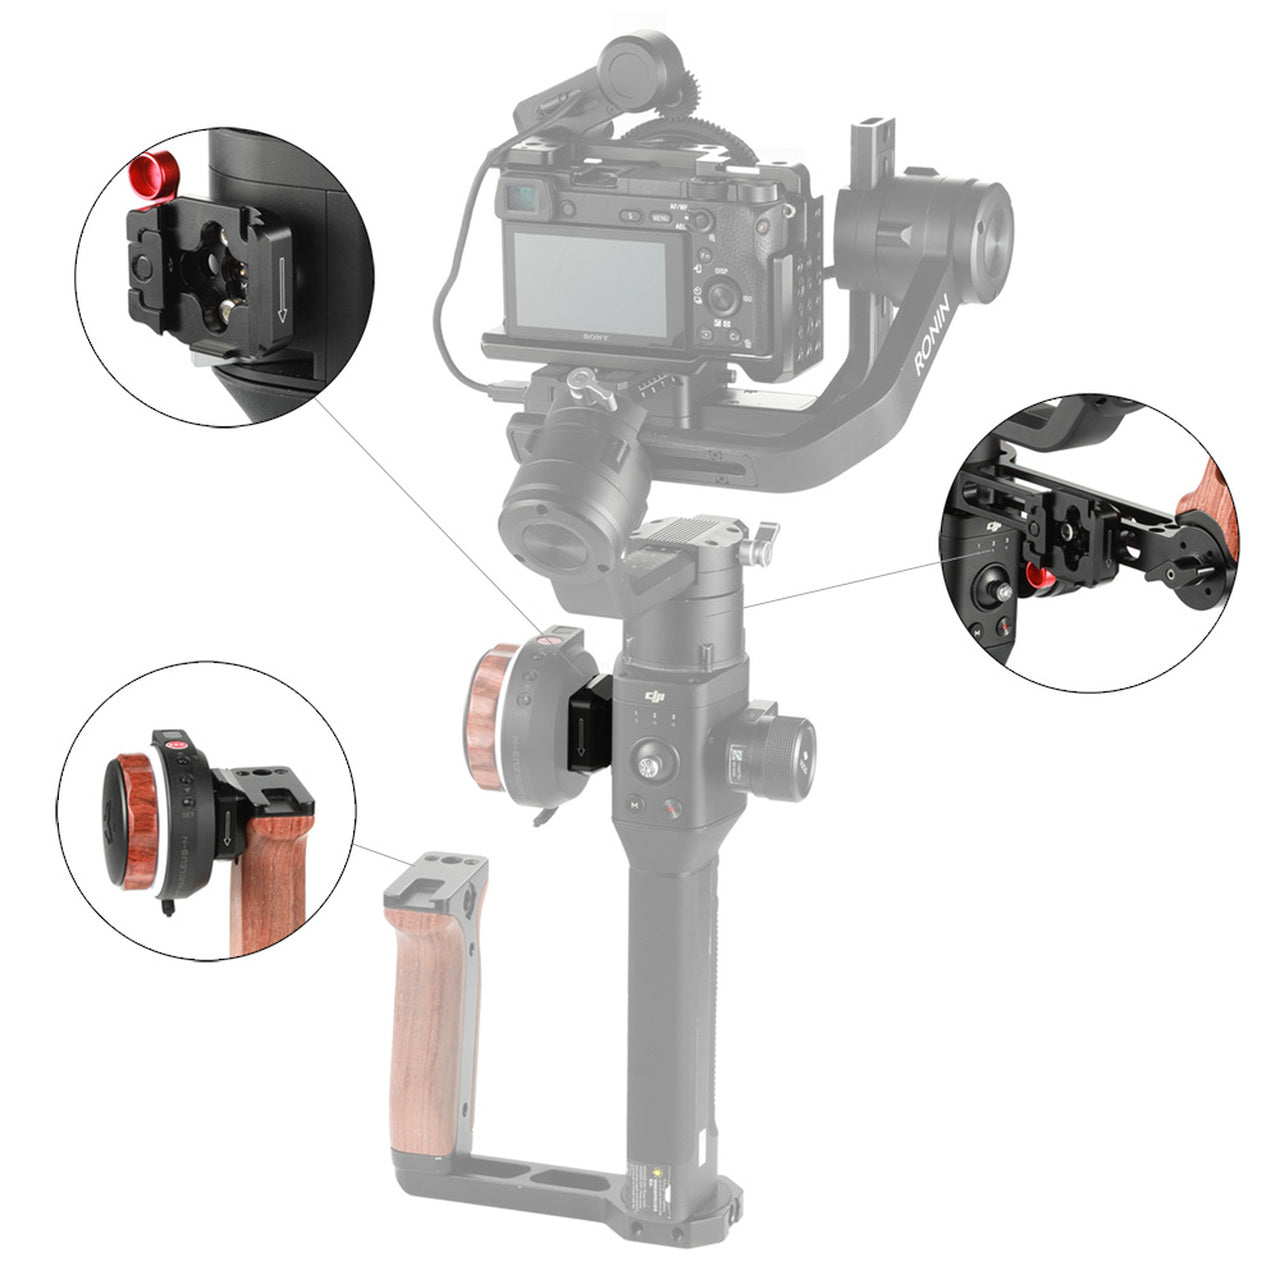 SmallRig Quick Release Mounting Clamp for Tilta Nucleus-Nano Wireless Focus Handwheel Controller with Quick Release Lever FAQ2323